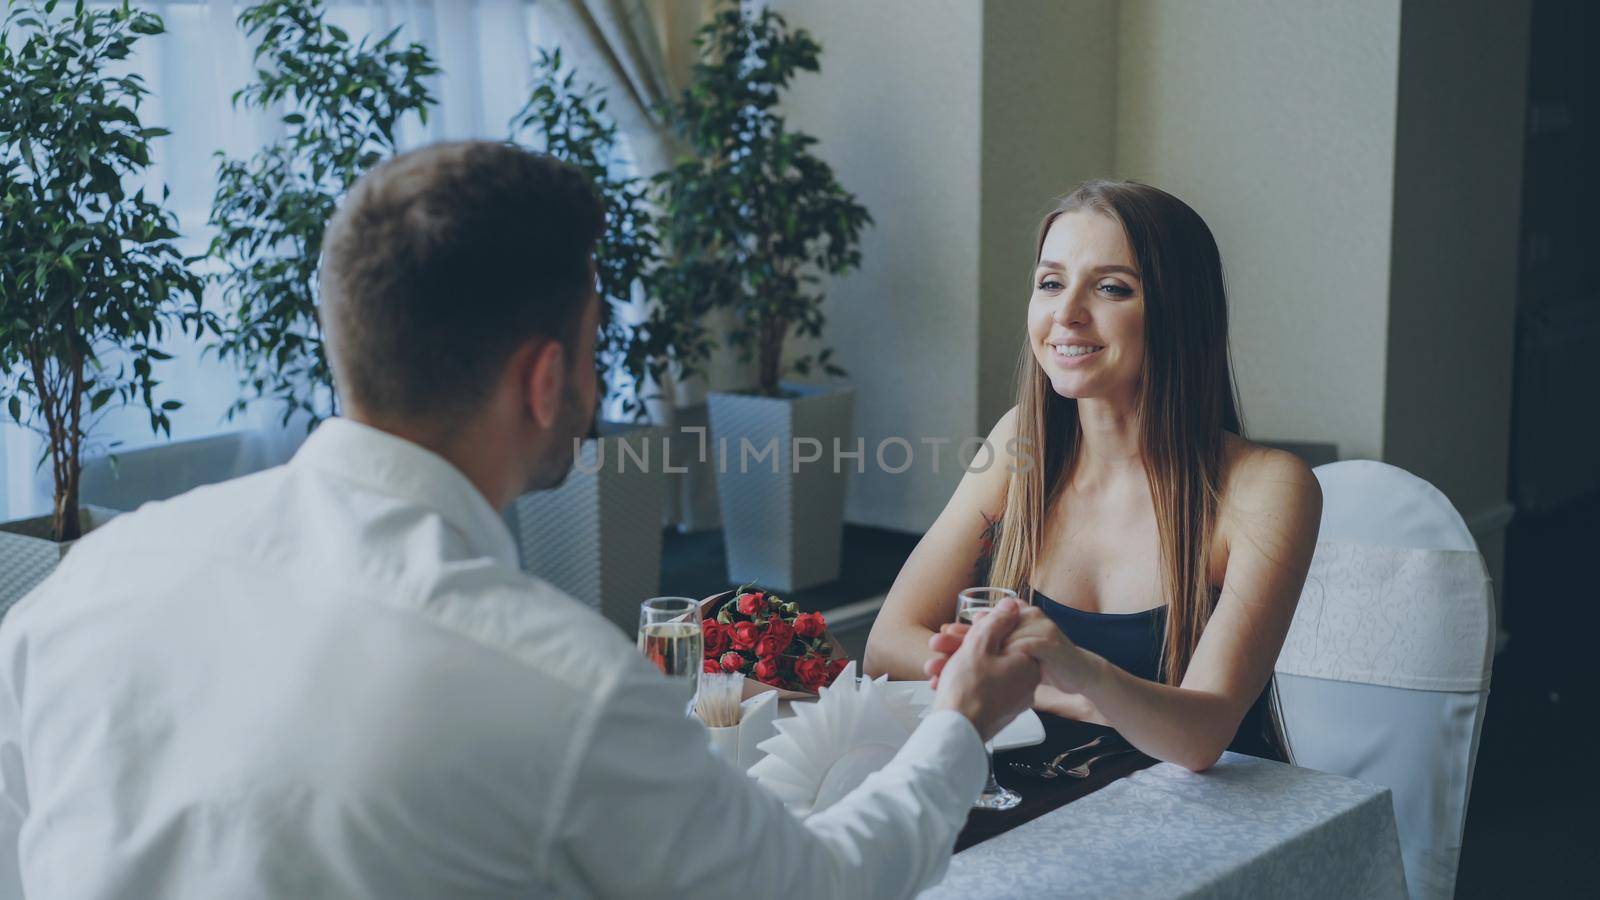 Young attractive girl in fancy clothes is talking to her bearded boyfriend while dining in restaurant. Flowers, champagne glasses, green plants and tableware are visible.